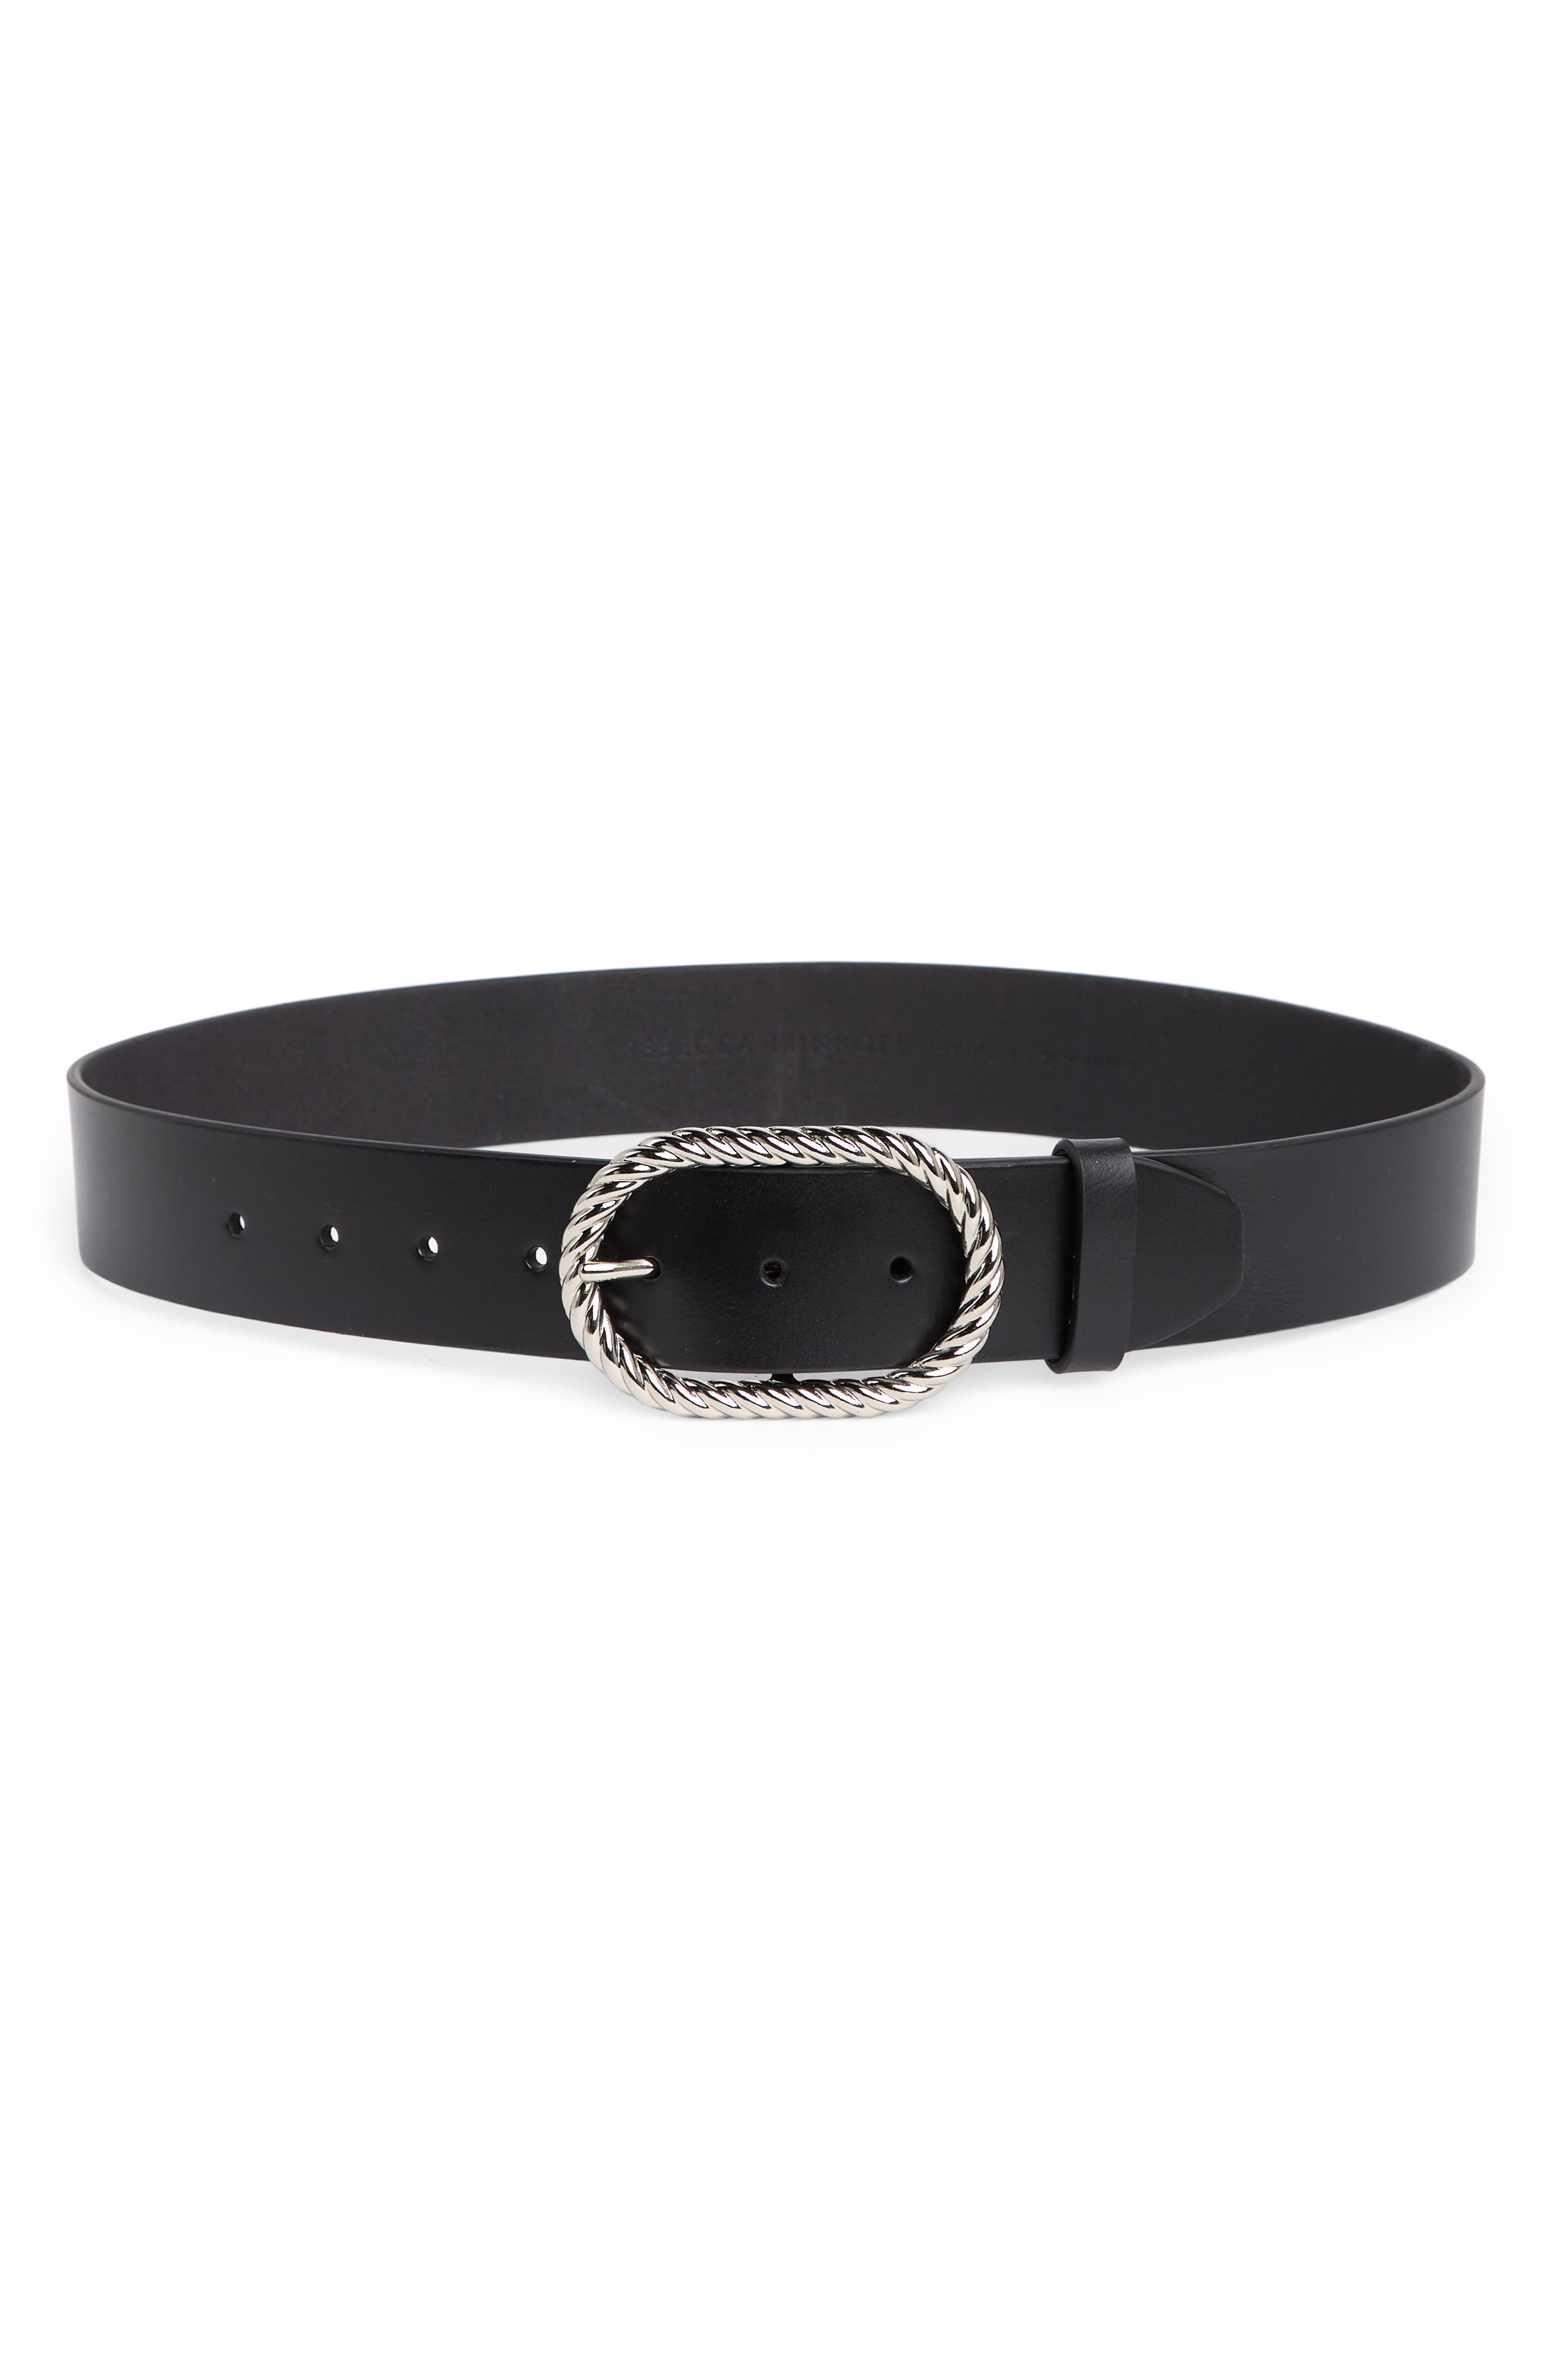 Rebecca Minkoff Leather Belt in Black at Nordstrom, Size Small